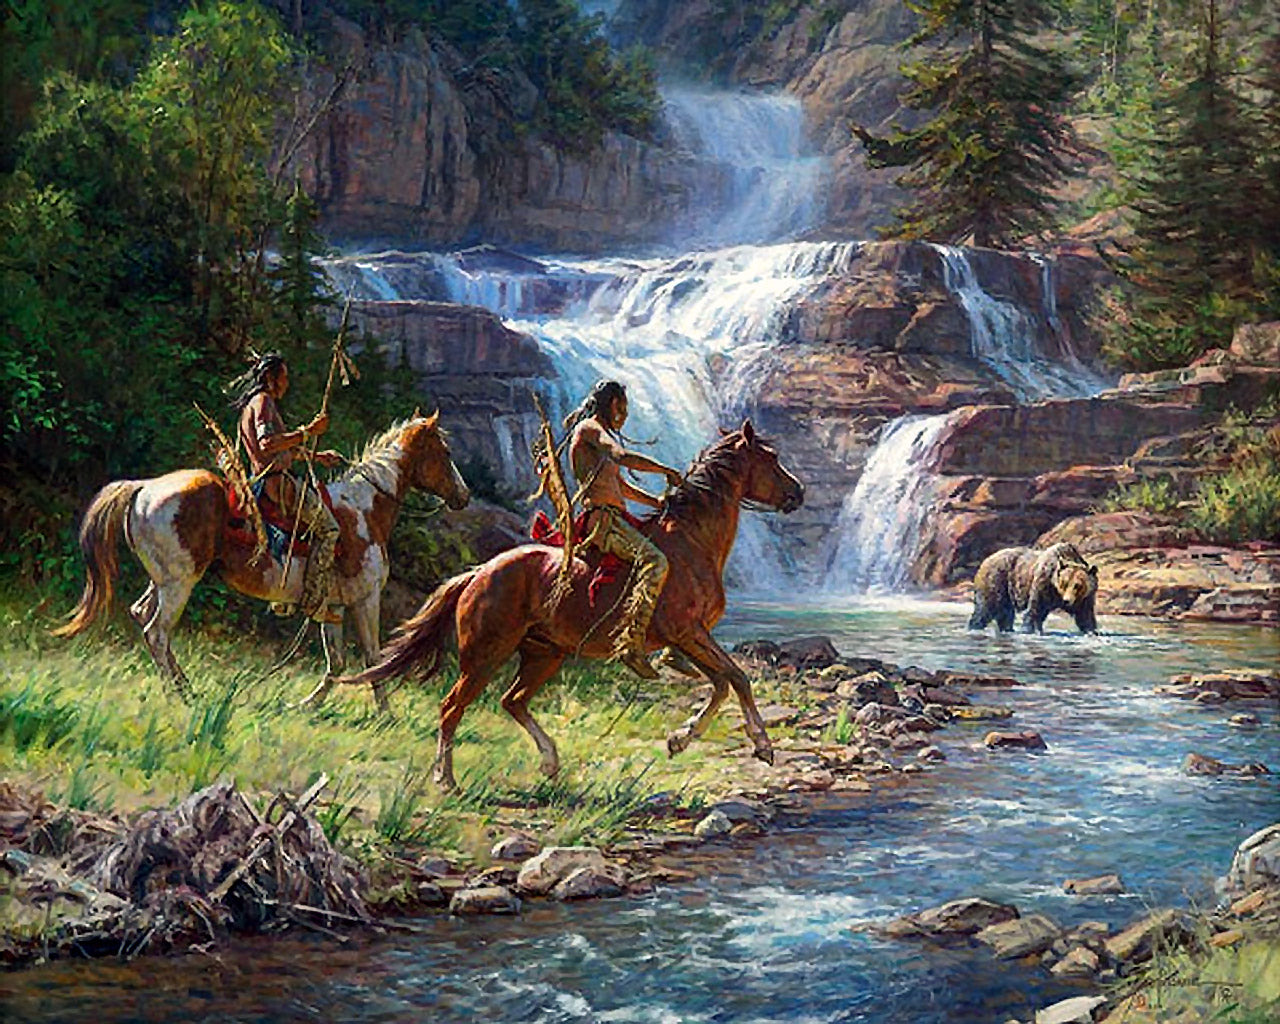 "Encounter by The Falls"